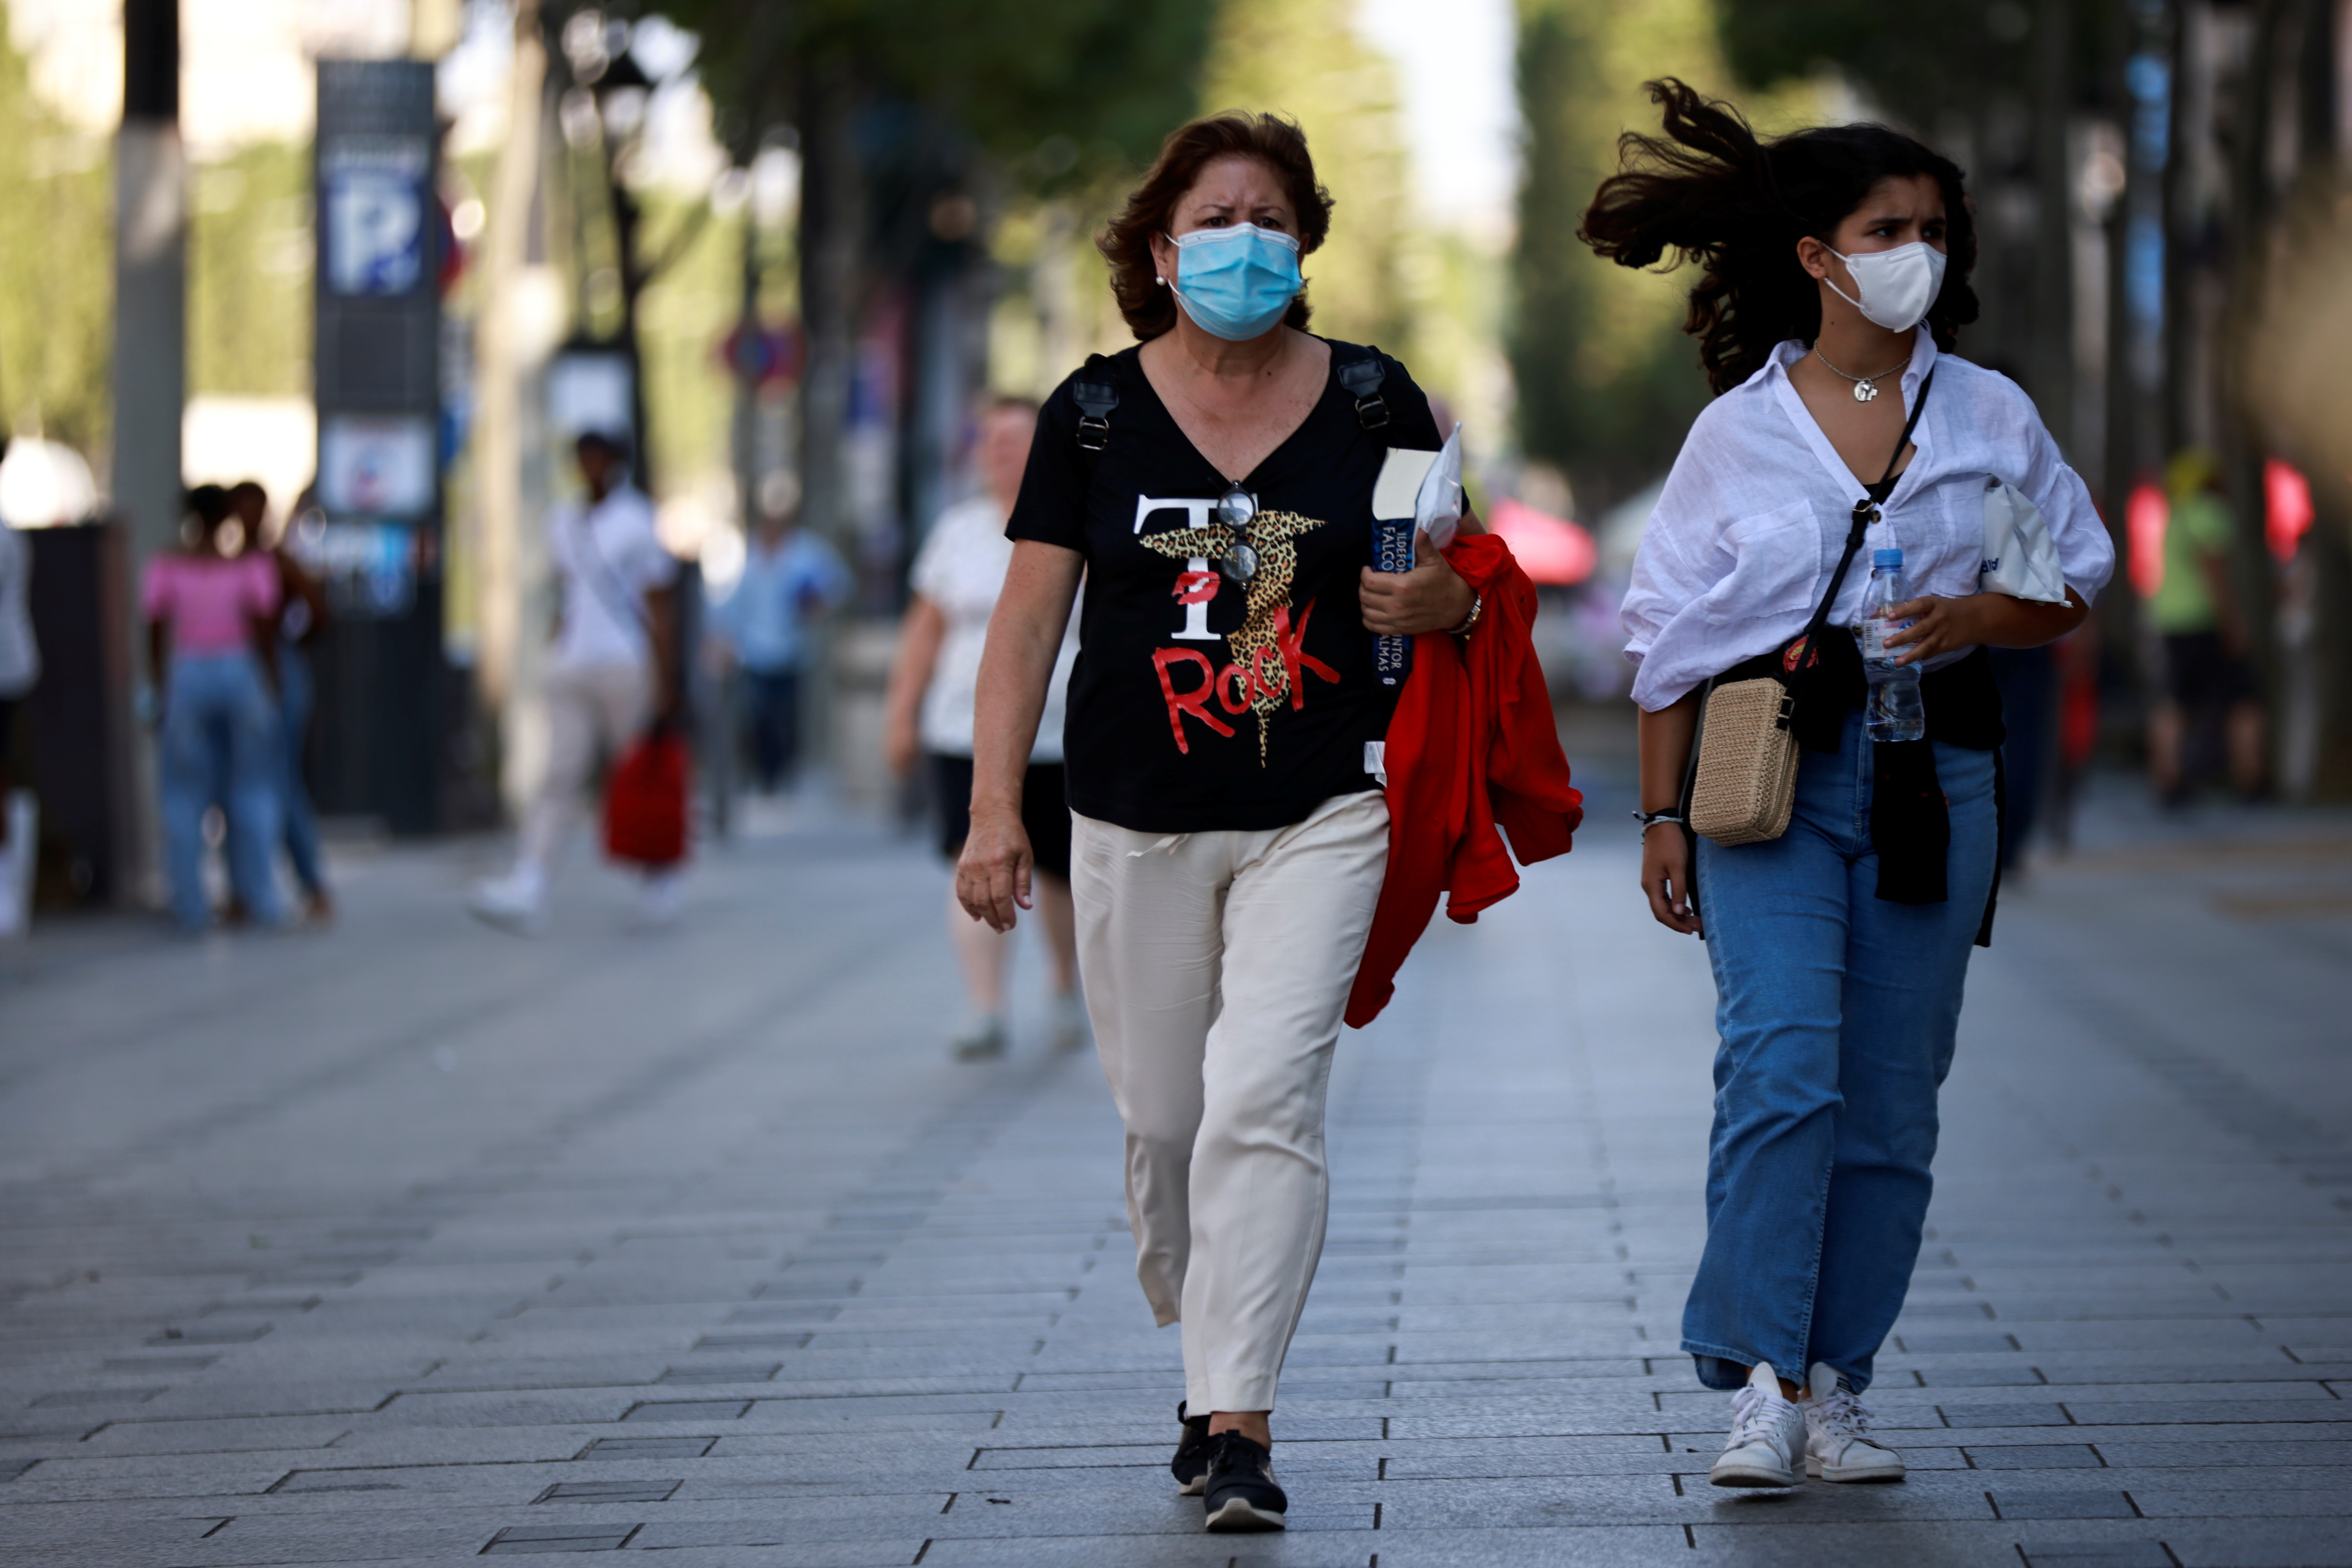 People wearing protective face masks walk on the Champs Elysees Avenue in Paris, amid the coronavirus disease (COVID-19) outbreak, in France, July 22, 2021. REUTERS/Sarah Meyssonnier